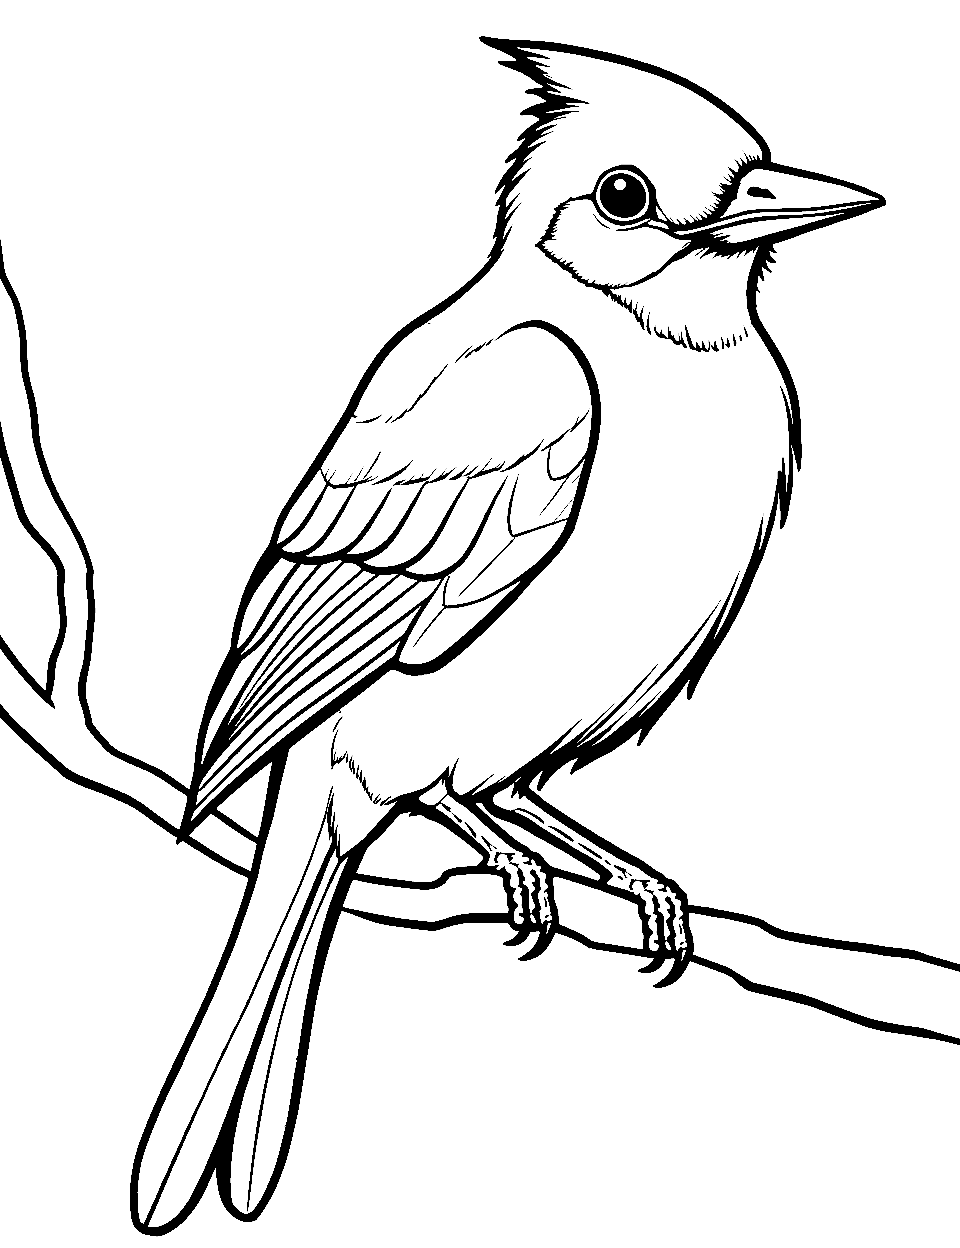 Blue Jay coloring page  Free Printable Coloring Pages